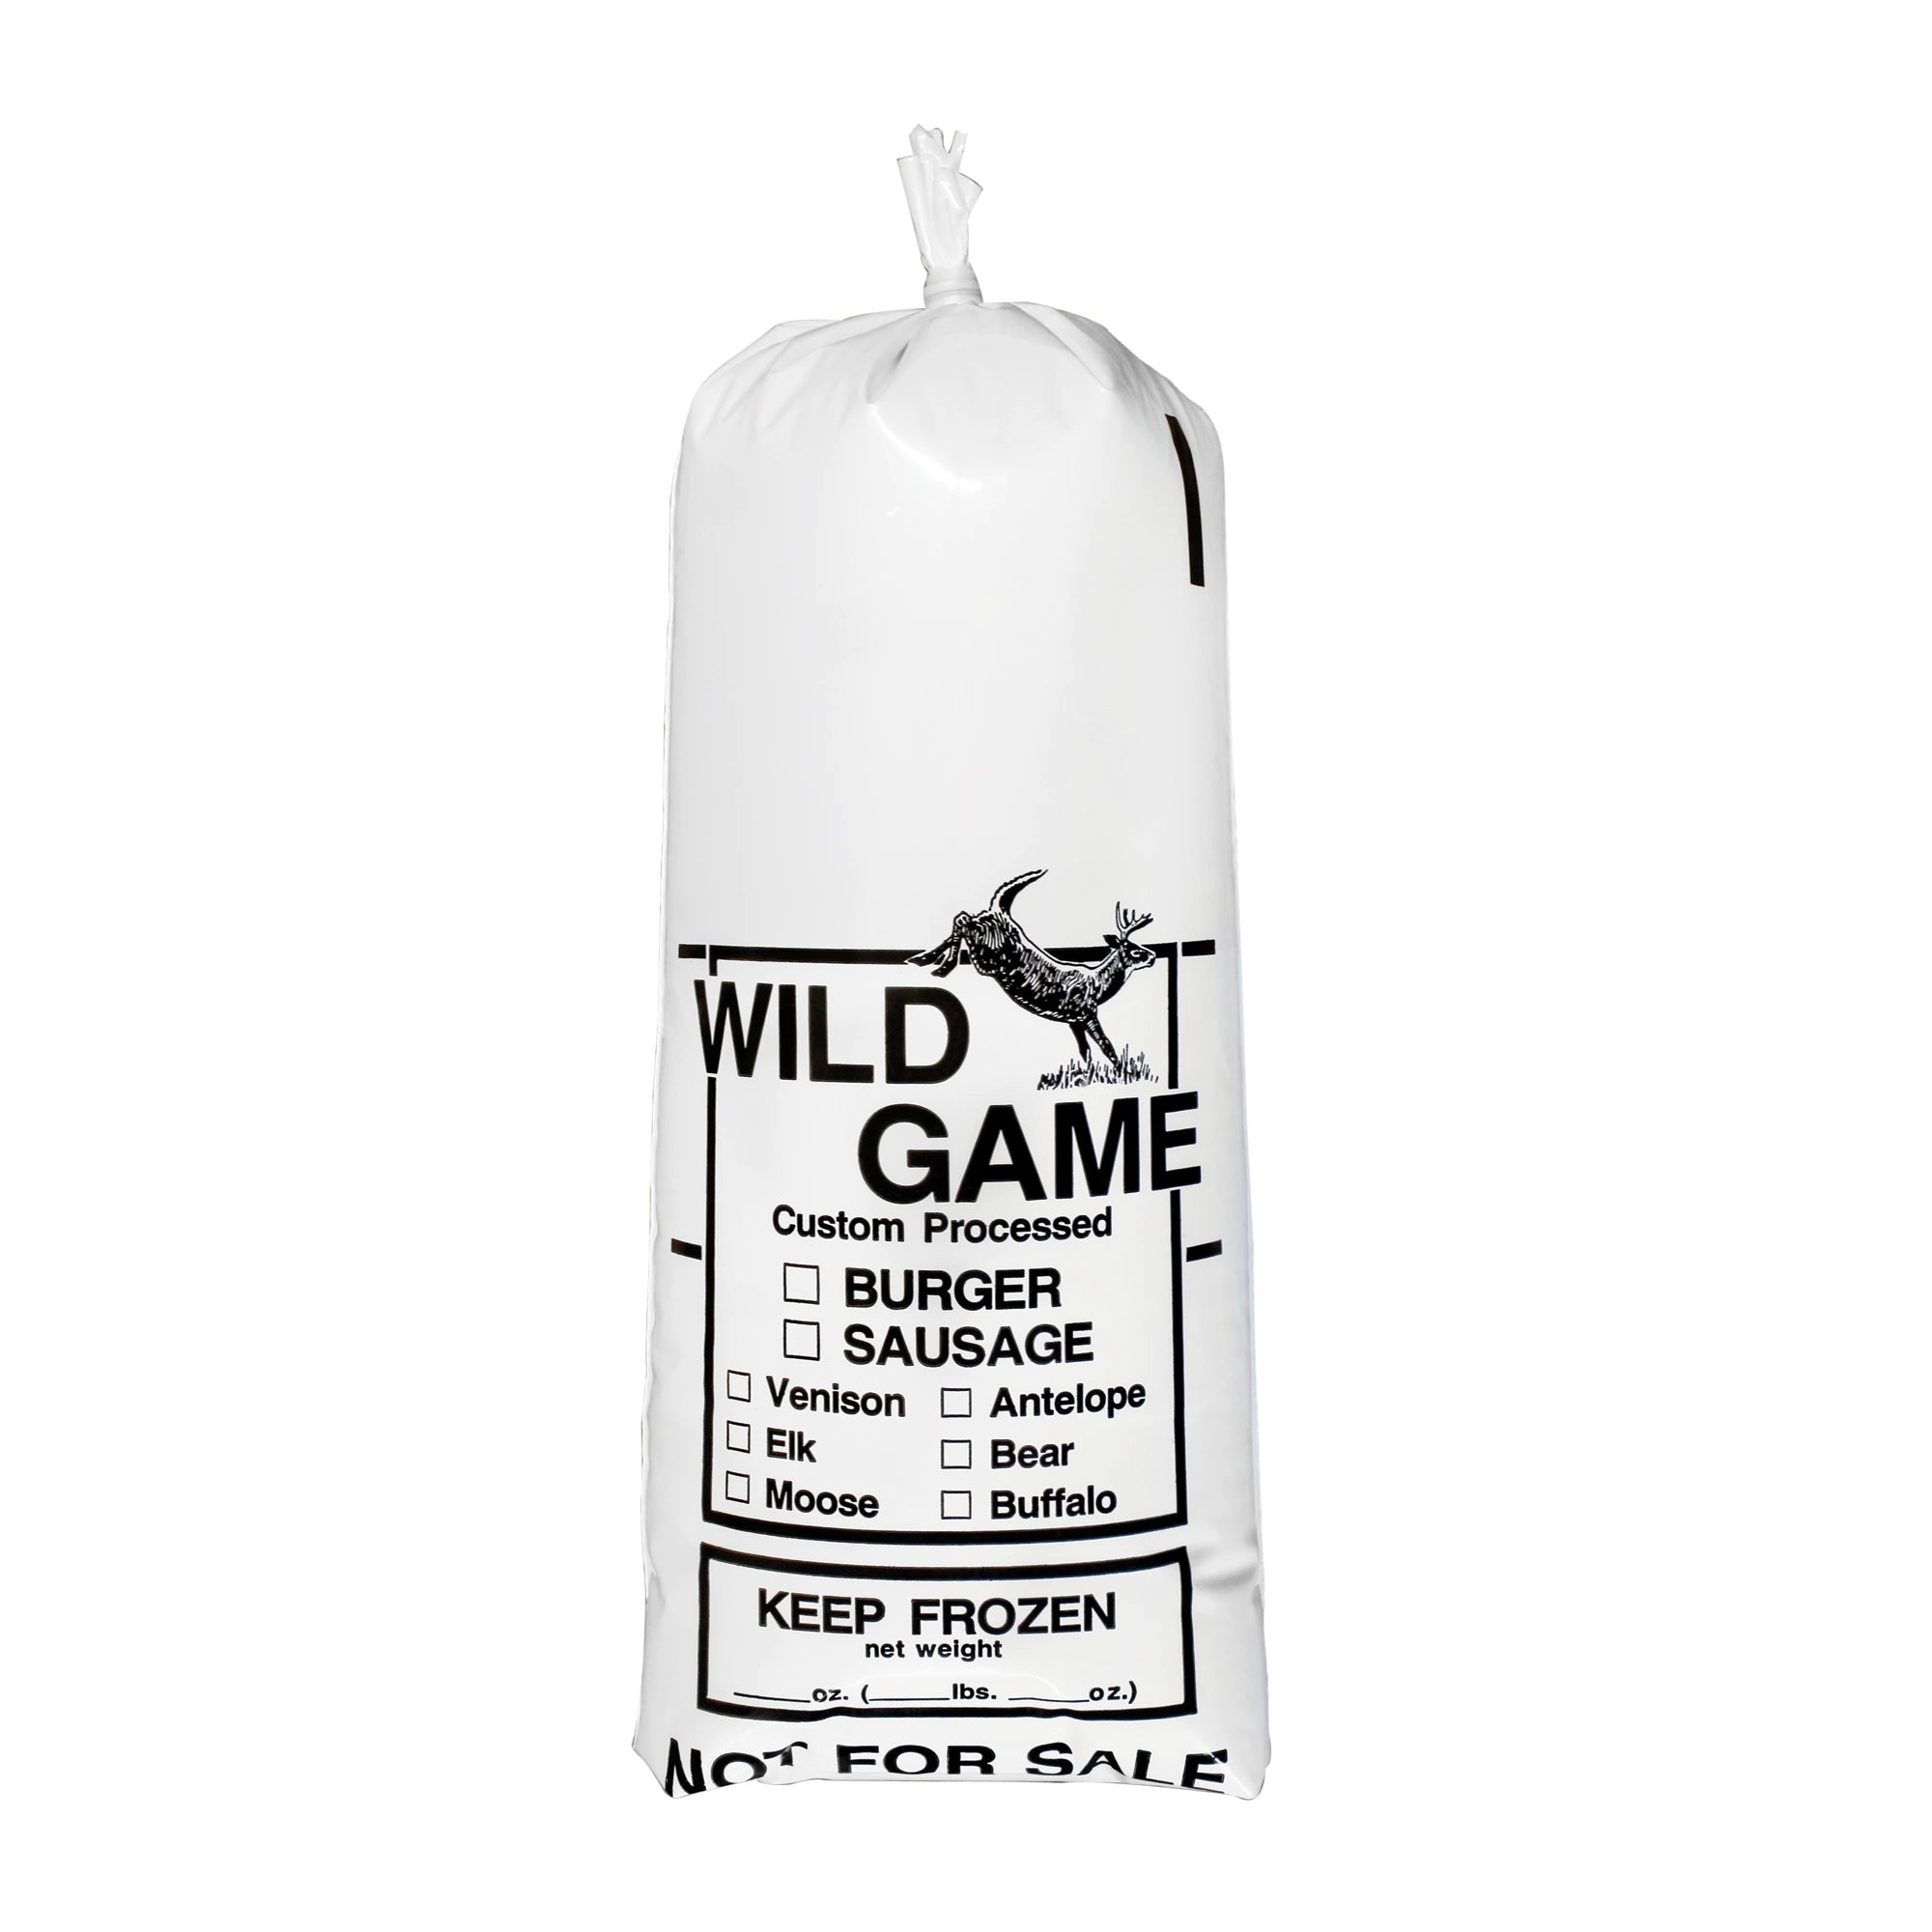 Wild Game Ground Meat Bags